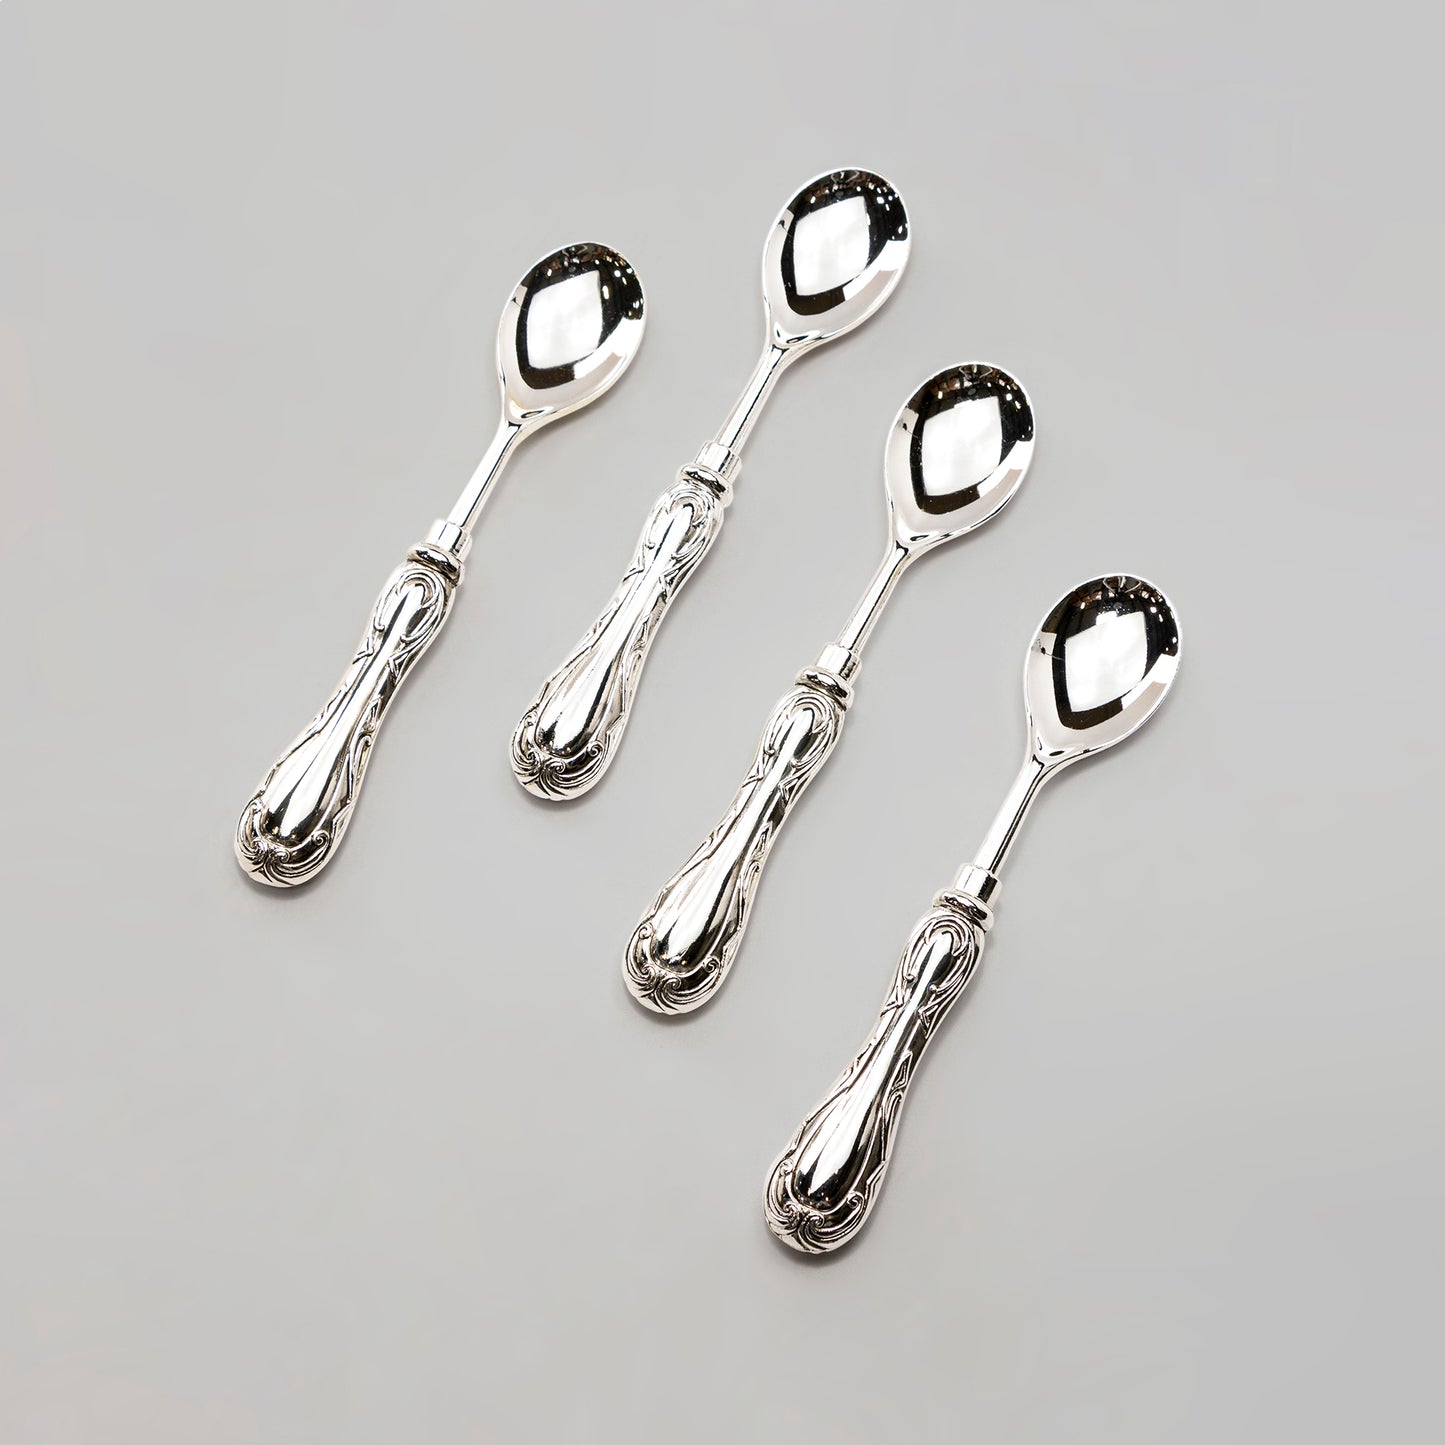 Silver Plated Demi Spoon Set of 4 with Scroll Decor Handle Design